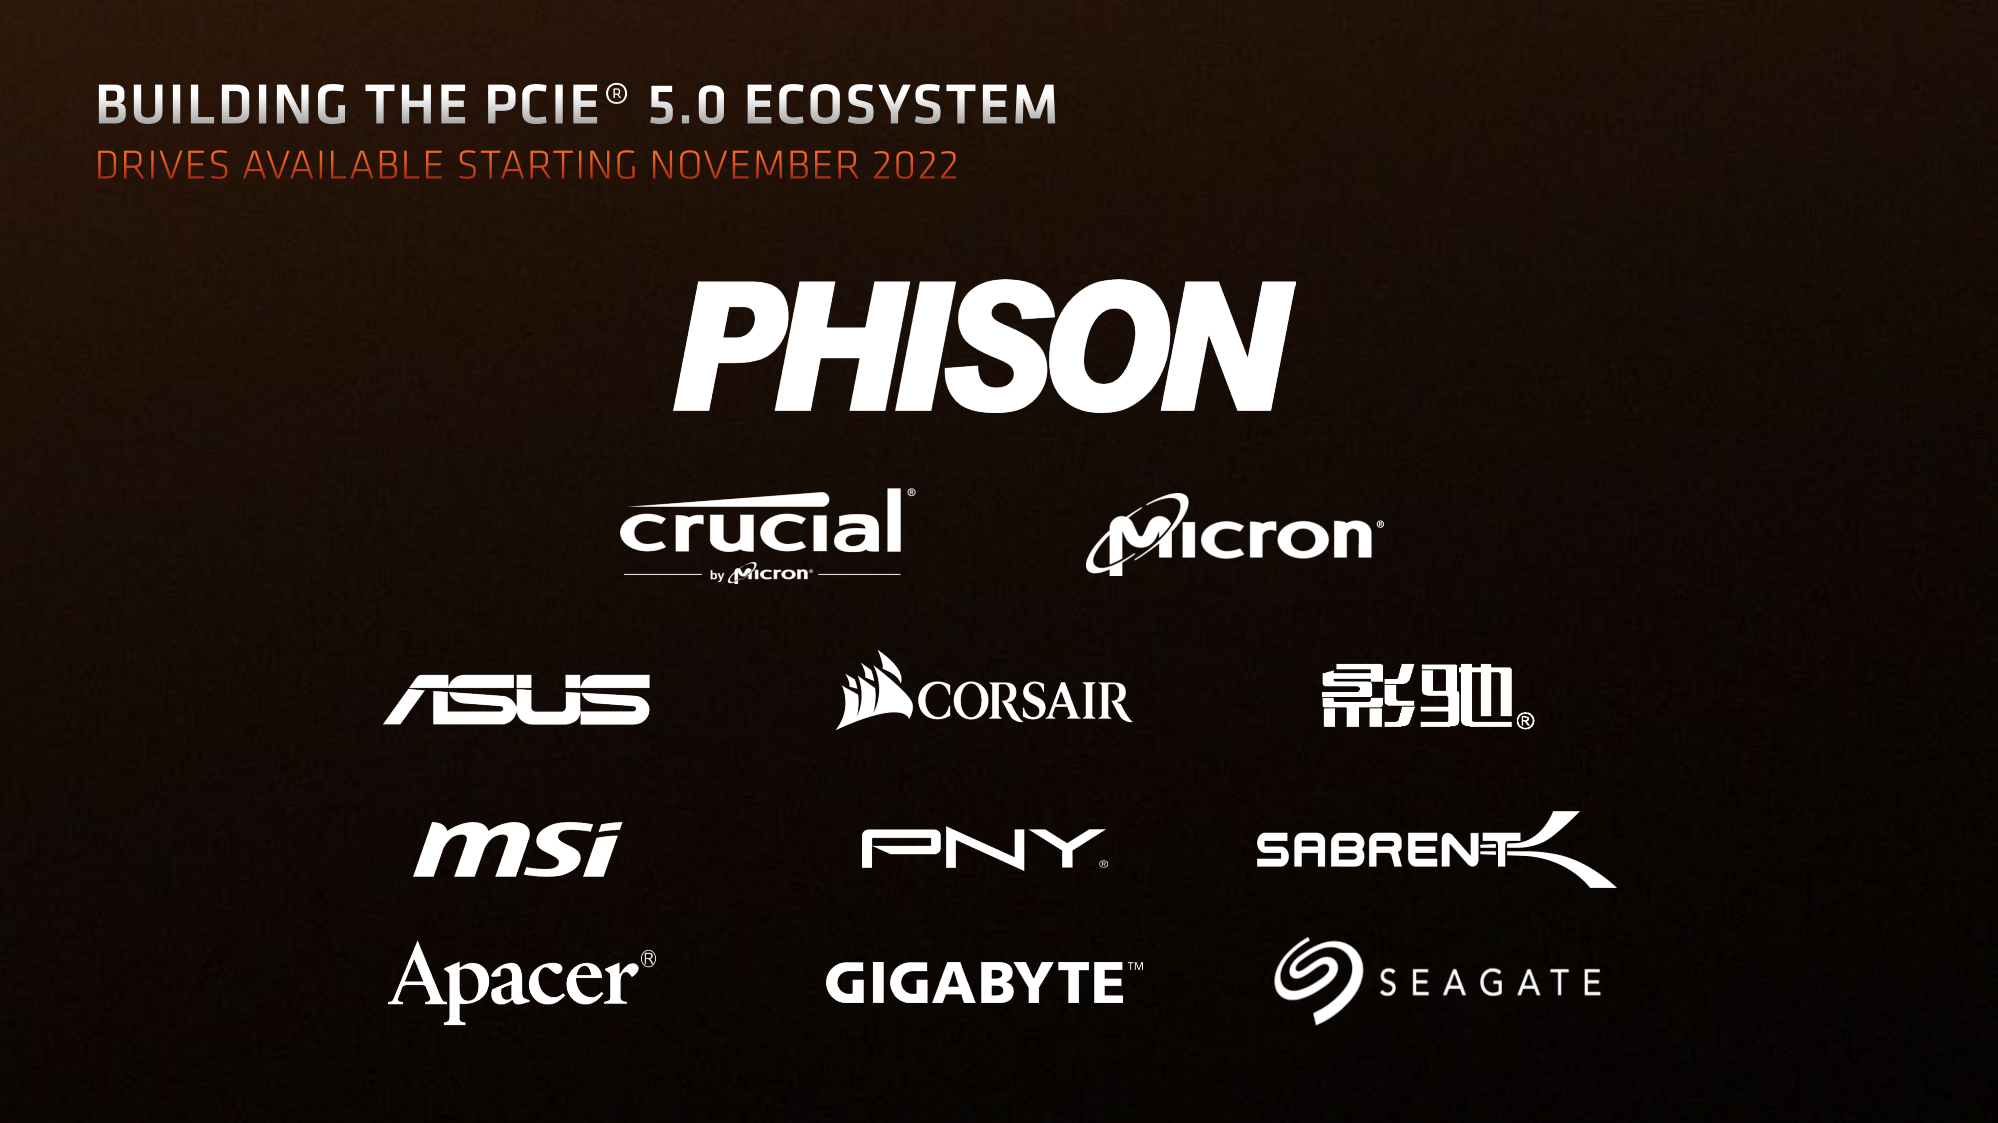 AMD slide showing PCIe 5.0 launch date